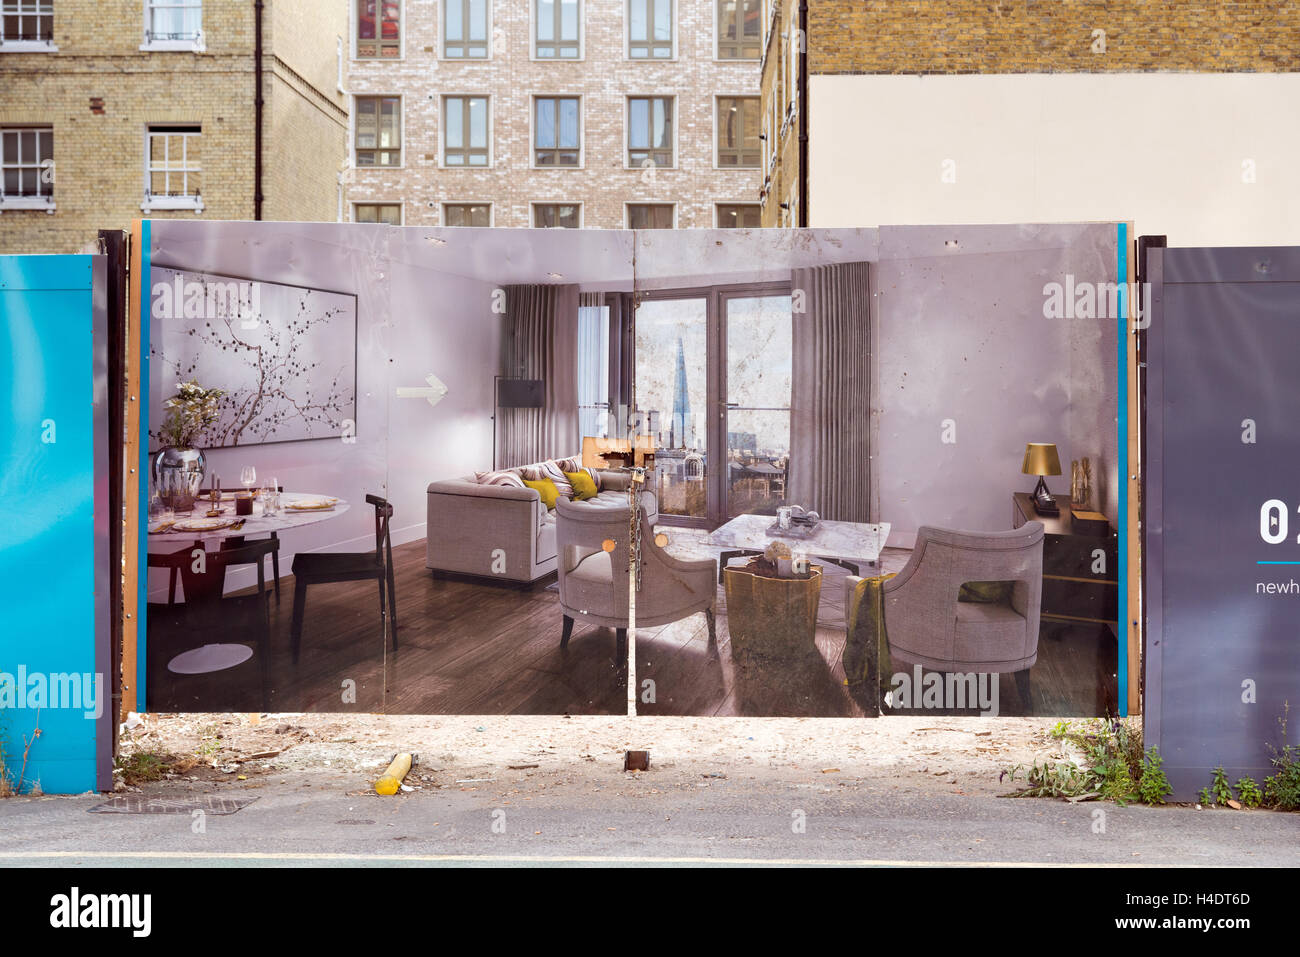 Hoarding showing the interior of new build apartments in a new property development in the City of London, England, UK Stock Photo